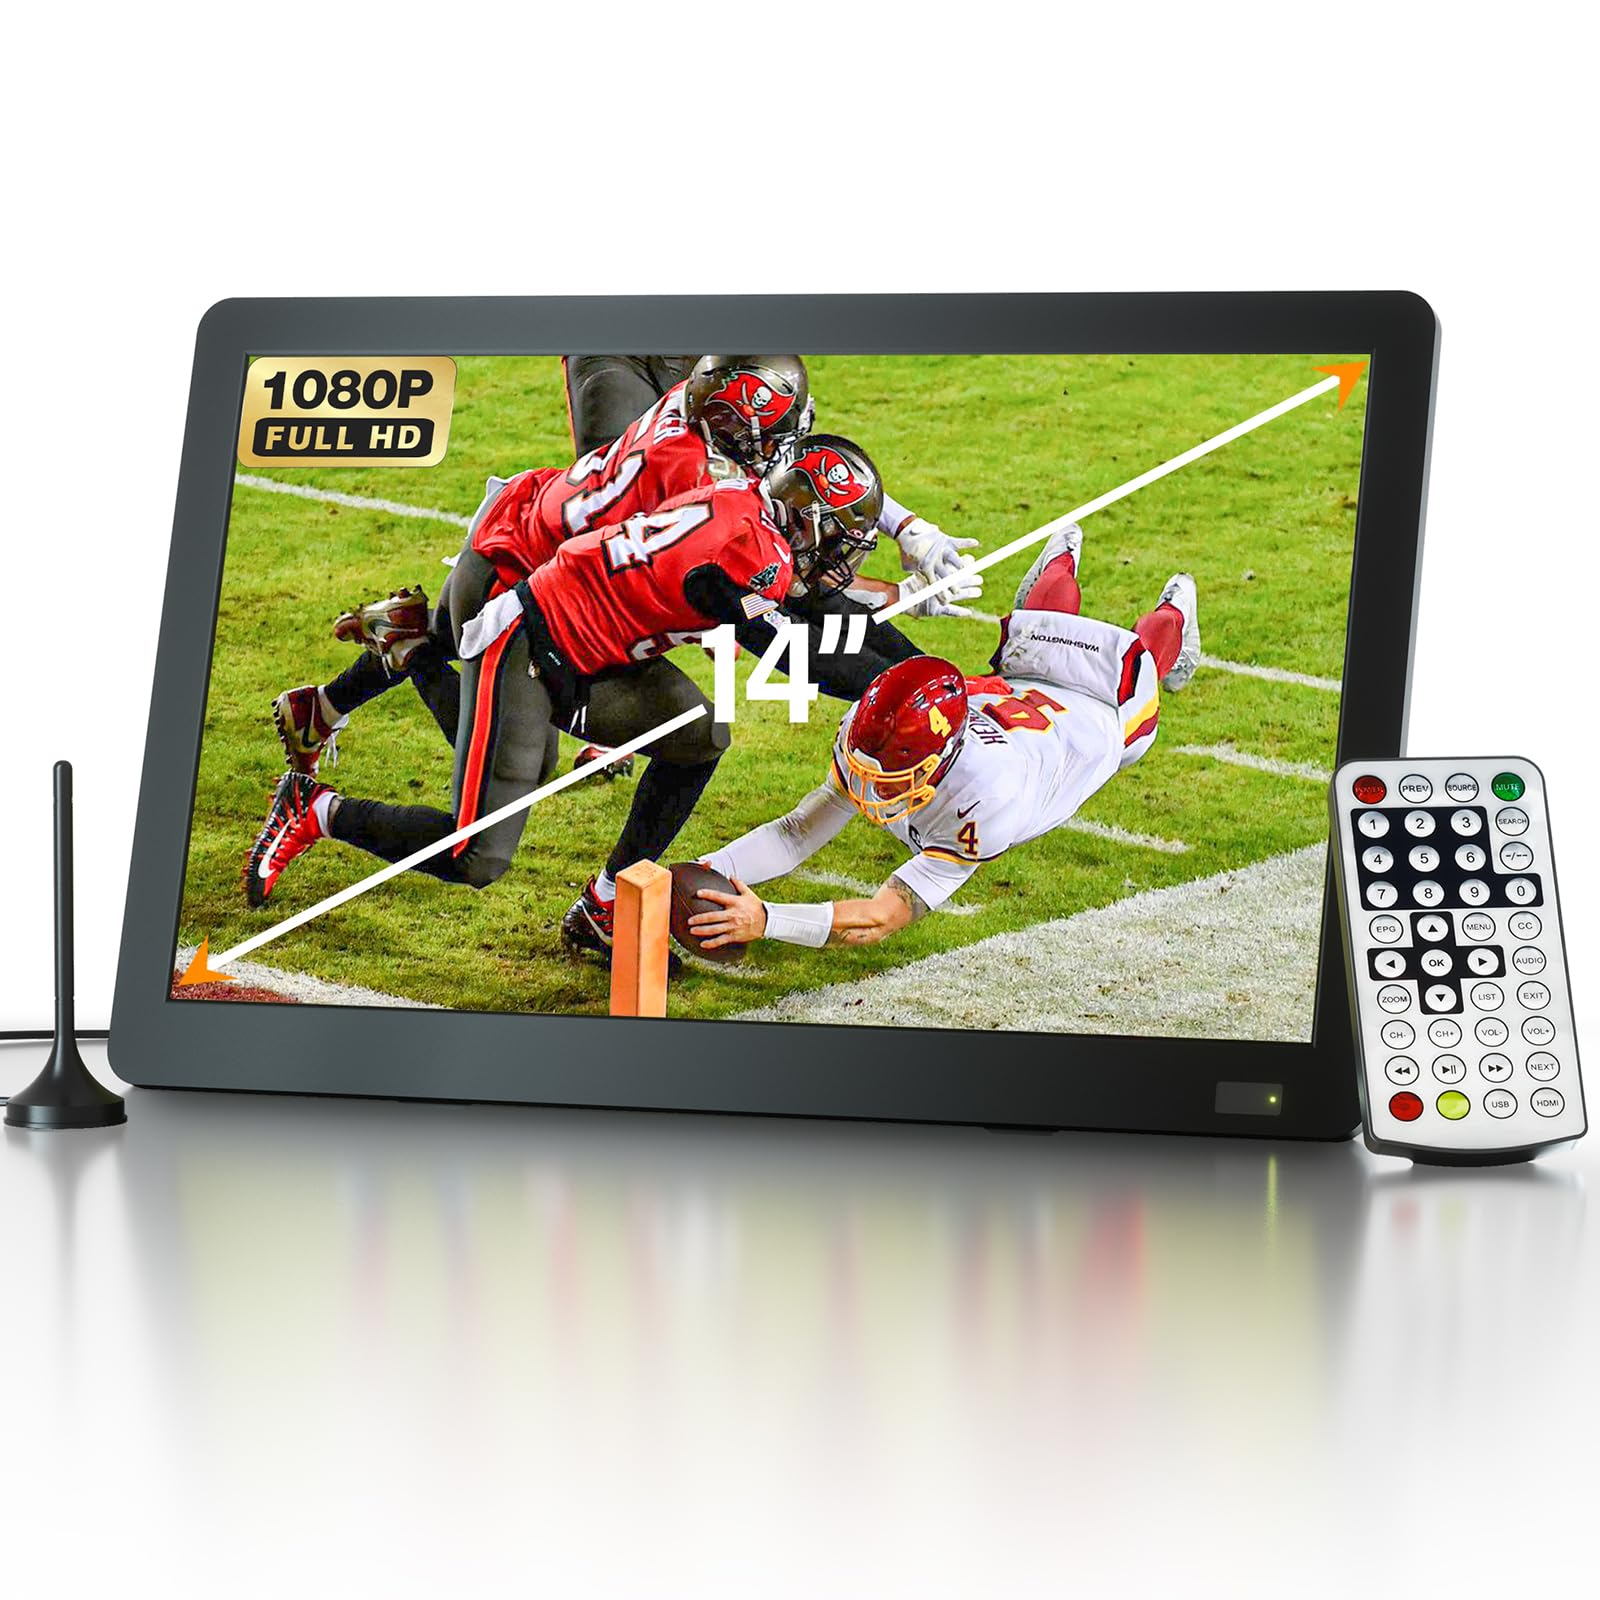 14 inch Portable TV with Antenna, DESOBRY Portable Small TV with ATSC Tuner, Rechargeable Battery Operated Mini TV LCD Monitor 1080P,Built-in TV Stand,HDMI Input,USB,AV In,Supports Camping,Kitchen,Car